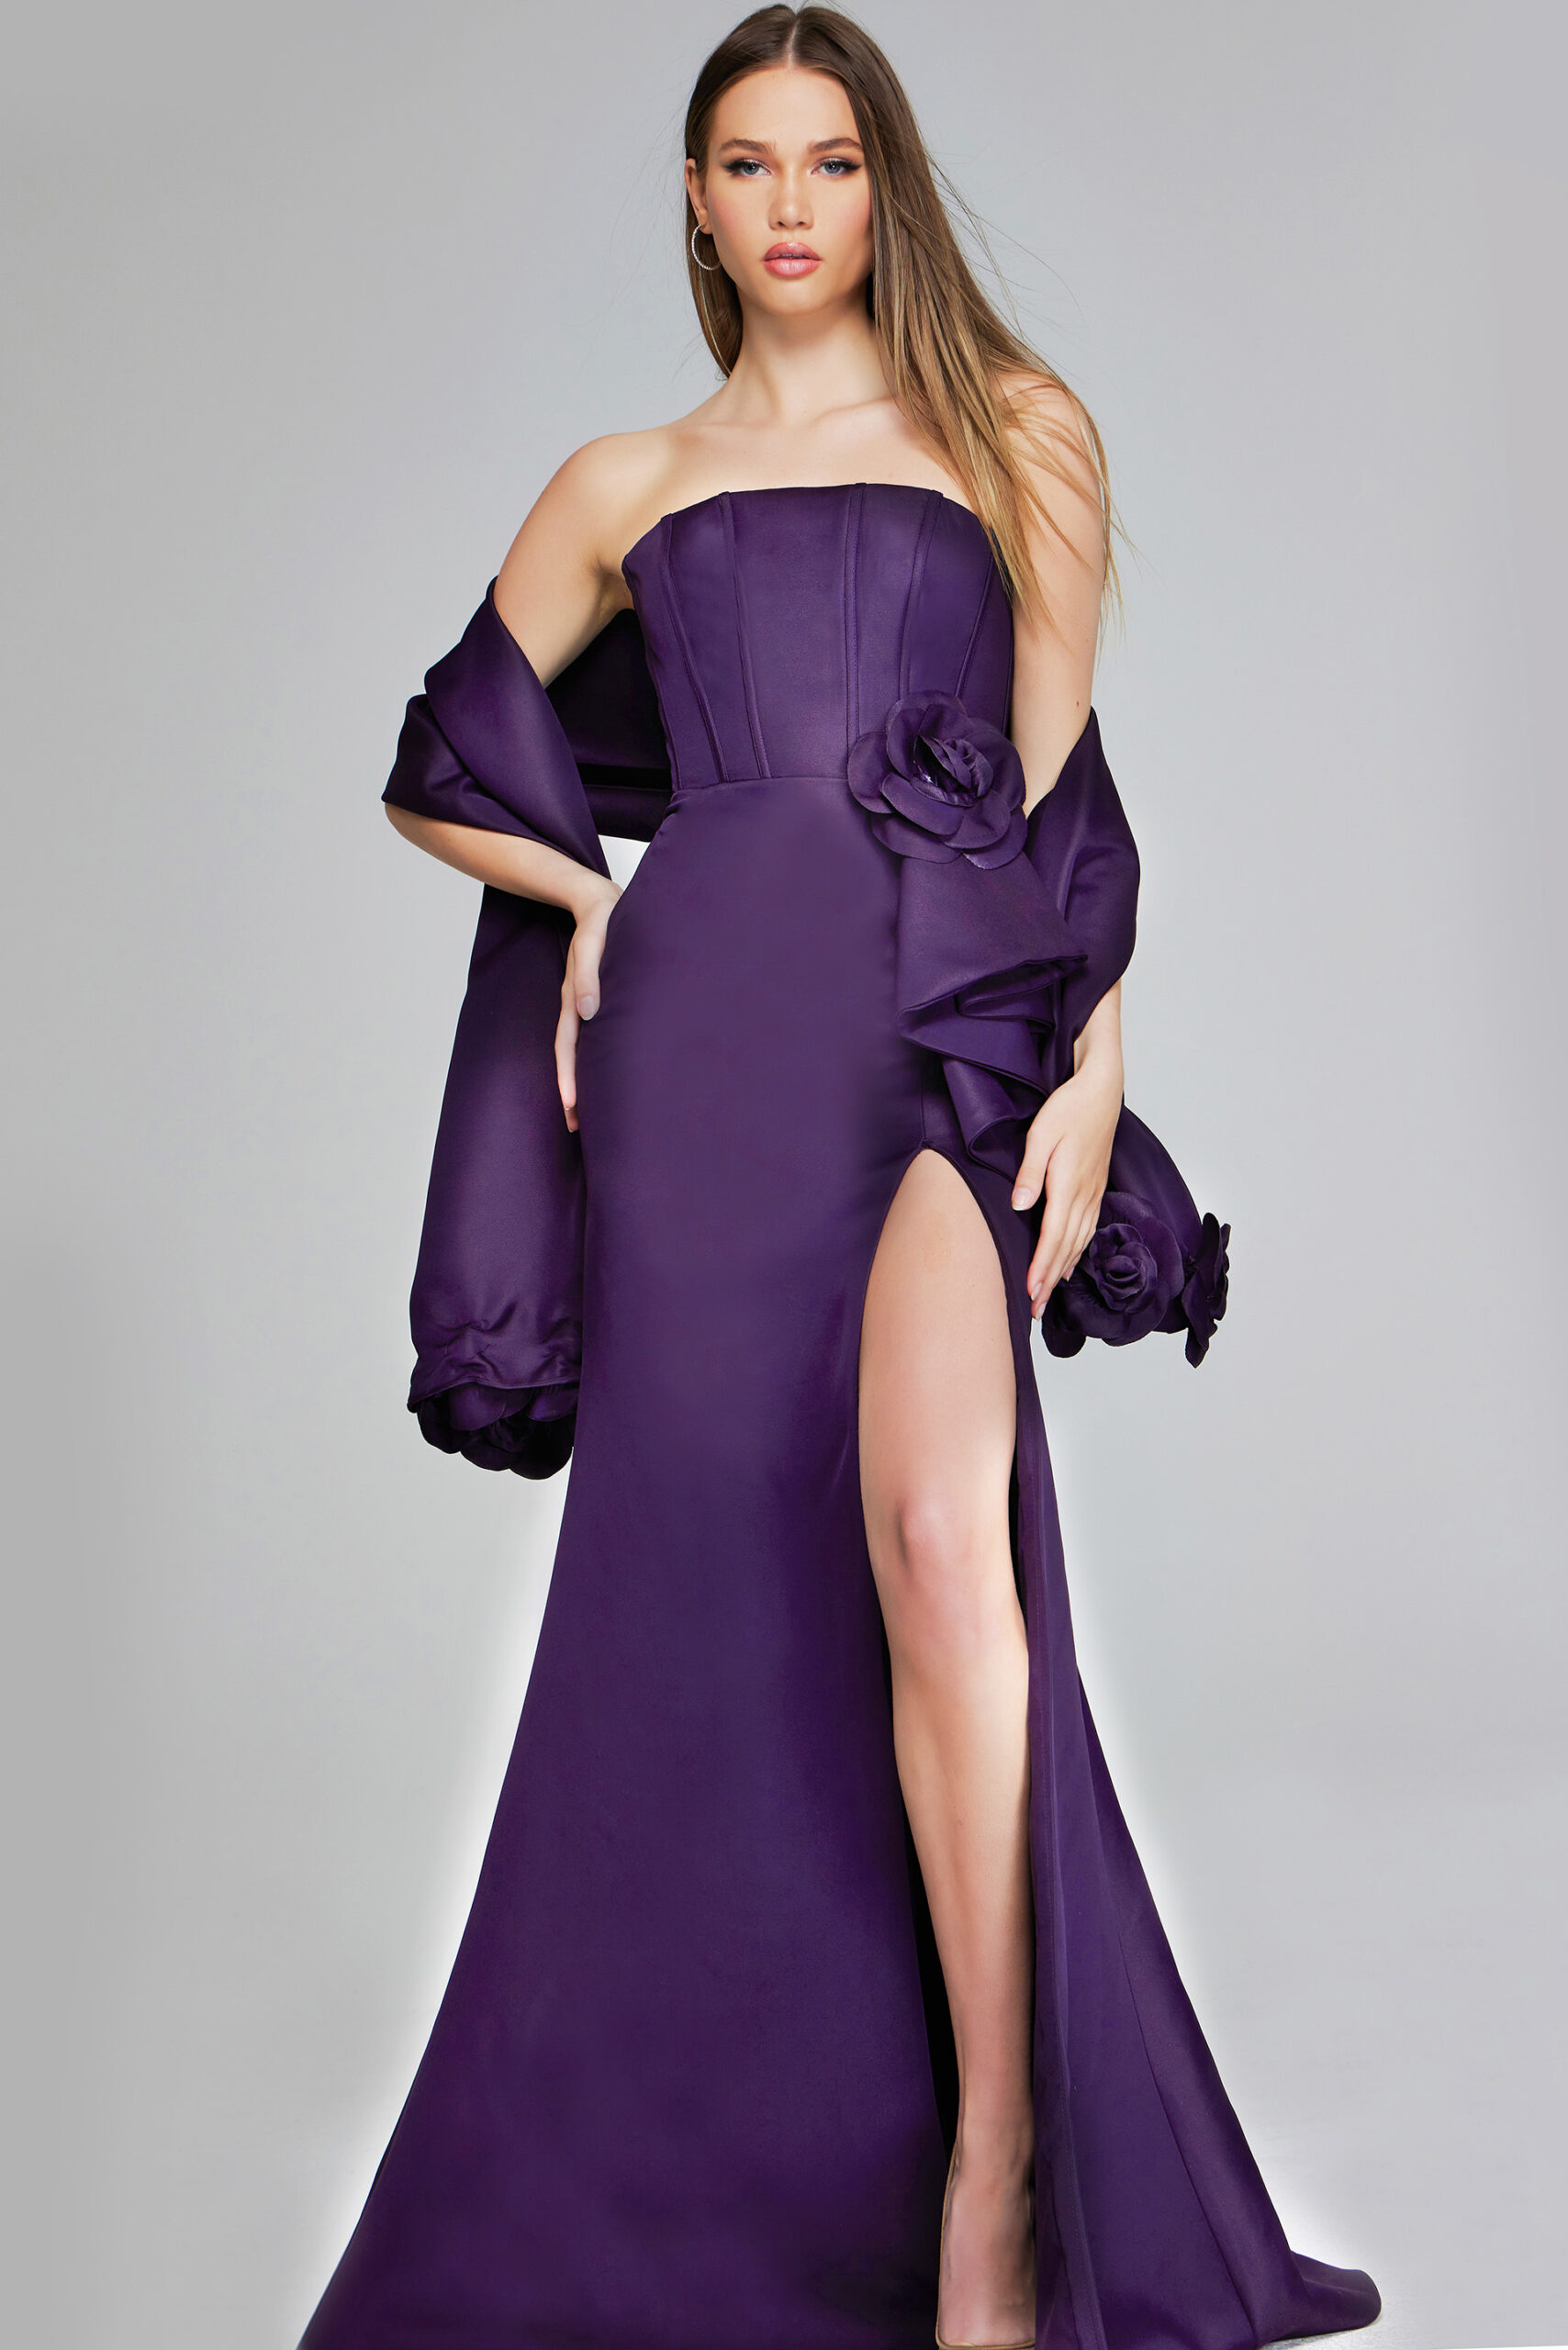 Model wearing Sophisticated Eggplant Strapless Gown with High Slit and Floral Accents 40592